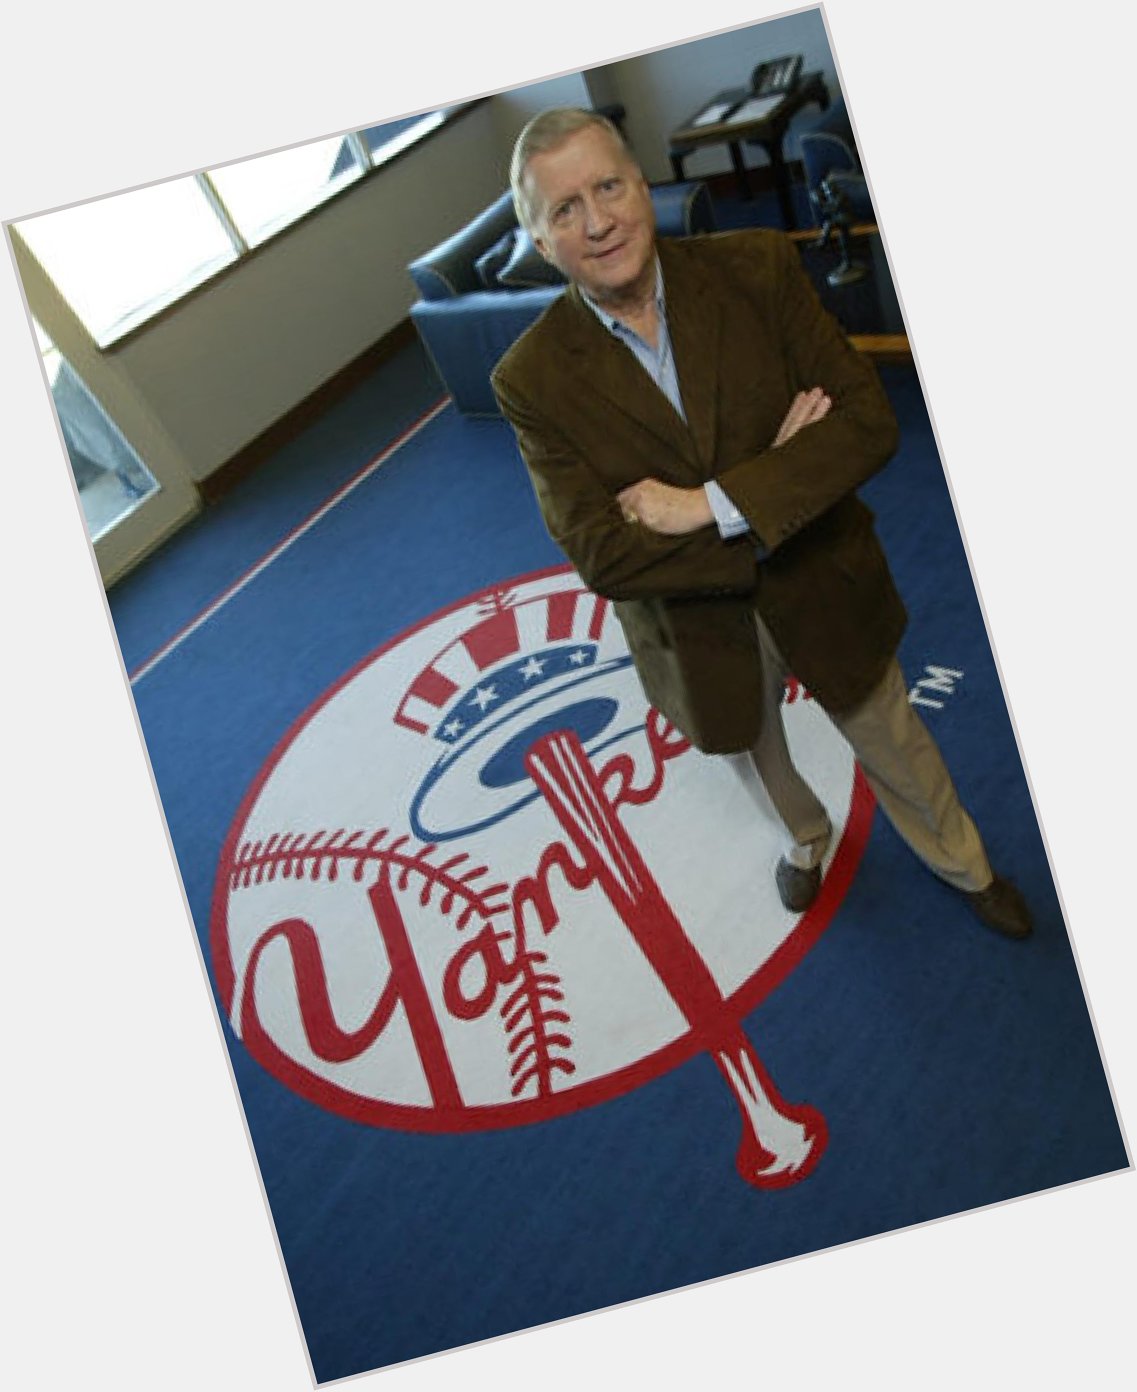 Happy Birthday to George Steinbrenner, who would have turned 85 today! 